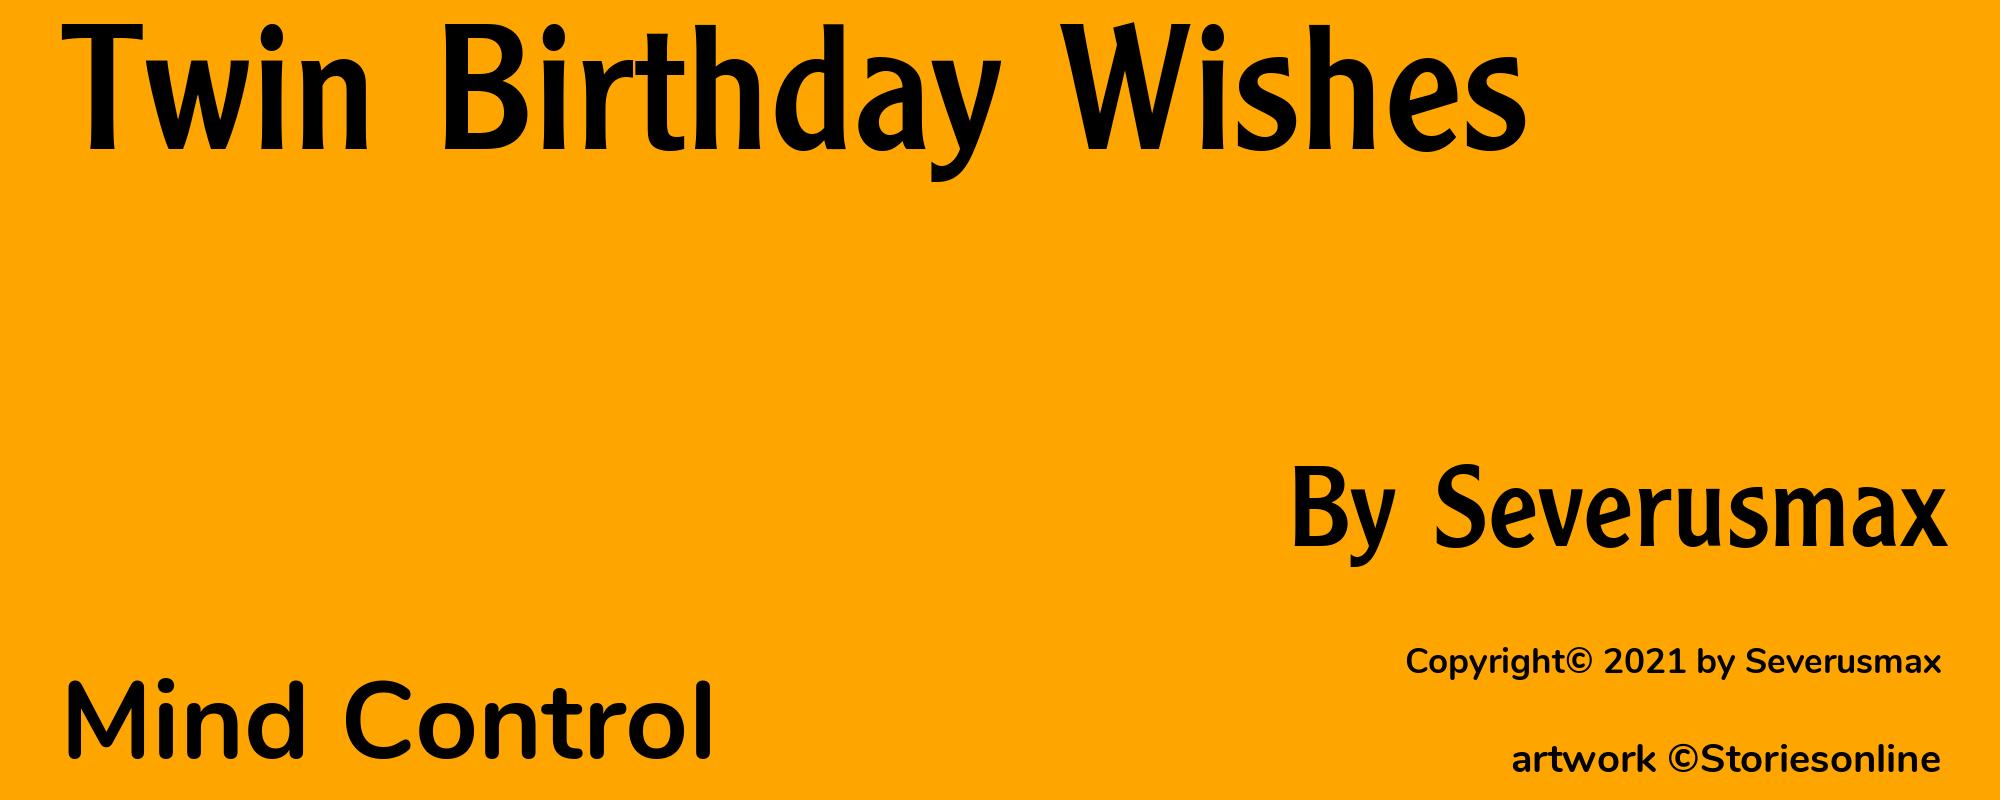 Twin Birthday Wishes - Cover